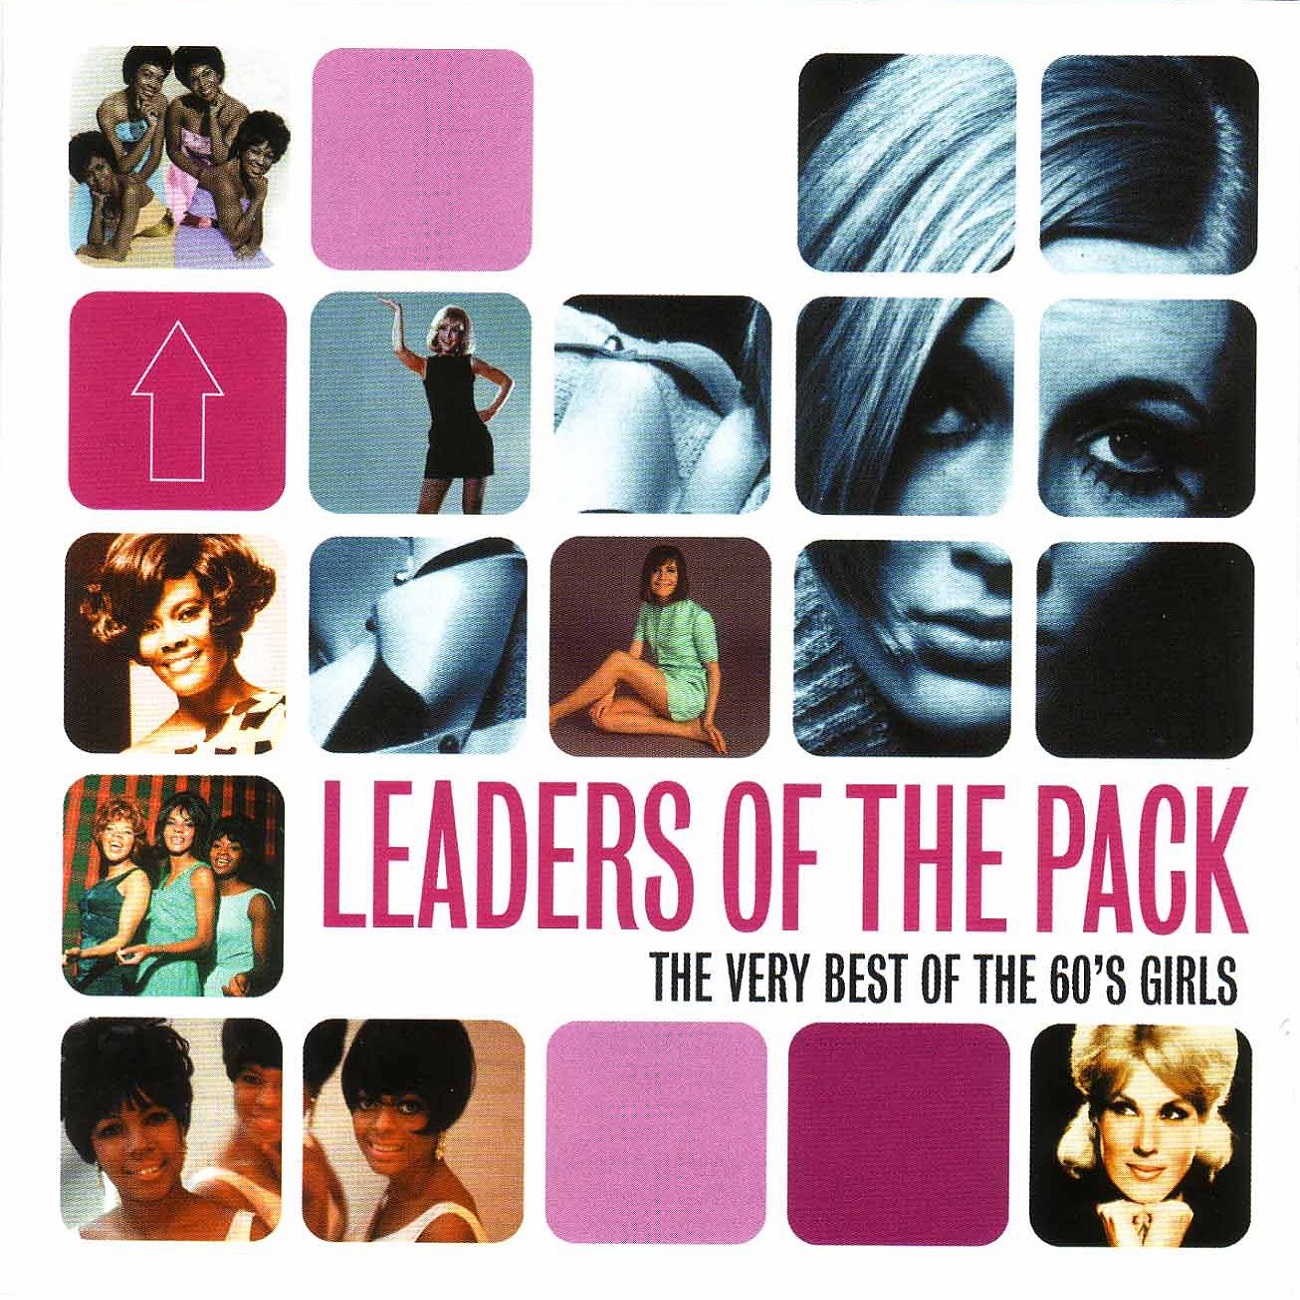 Leaders Of The Pack The Very Best Of The 60s Girls Cd1 2004 Pop Va Download Pop Music